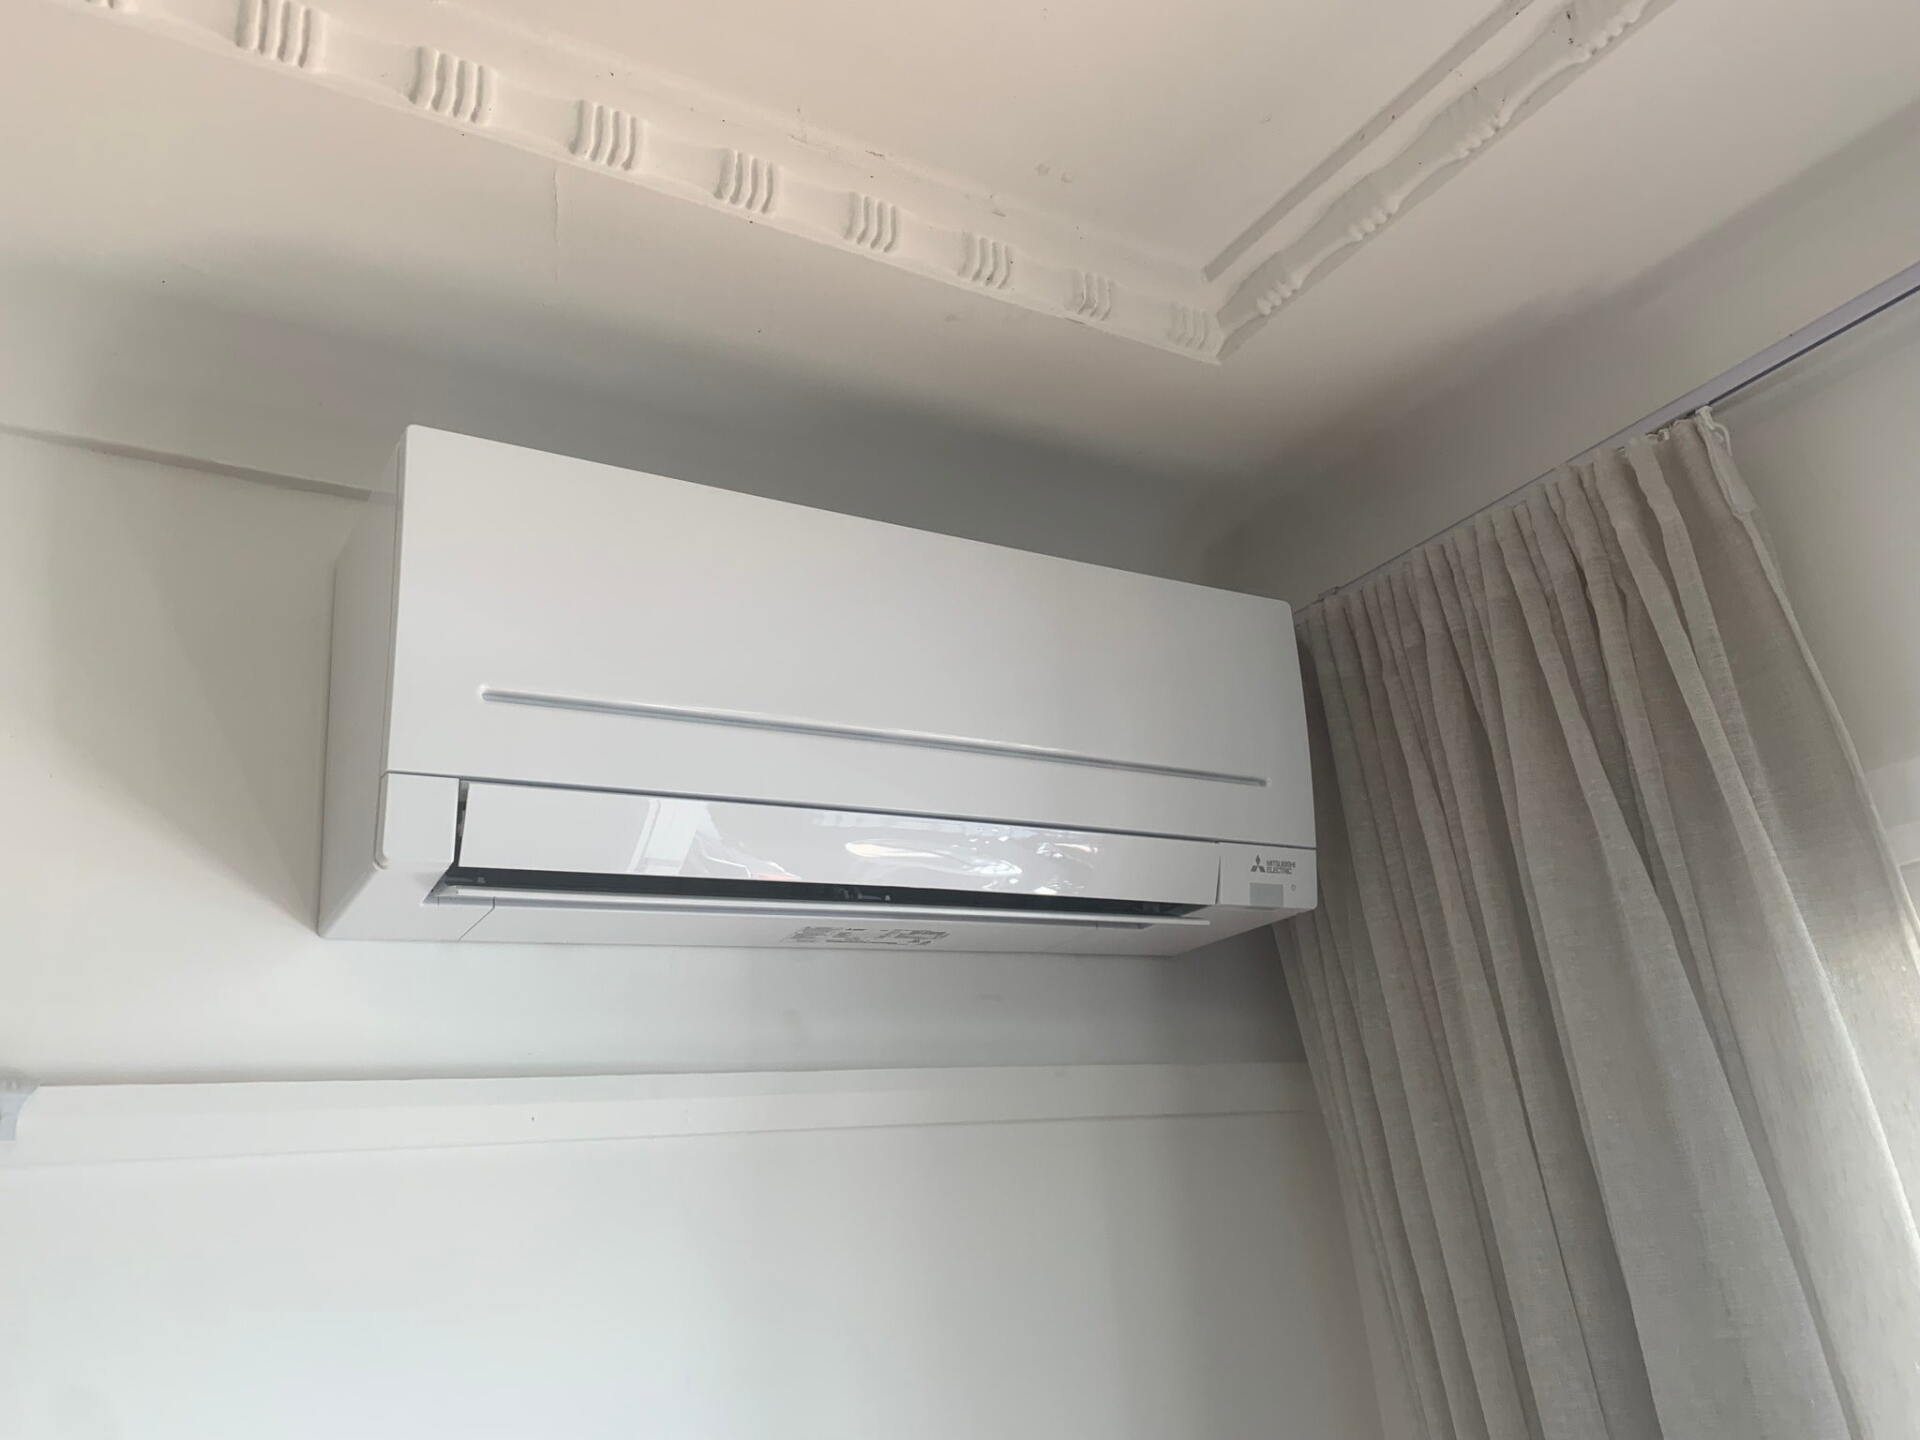 Mitsubishi Electric Split System — Air Conditioners in Illawarra, NSW